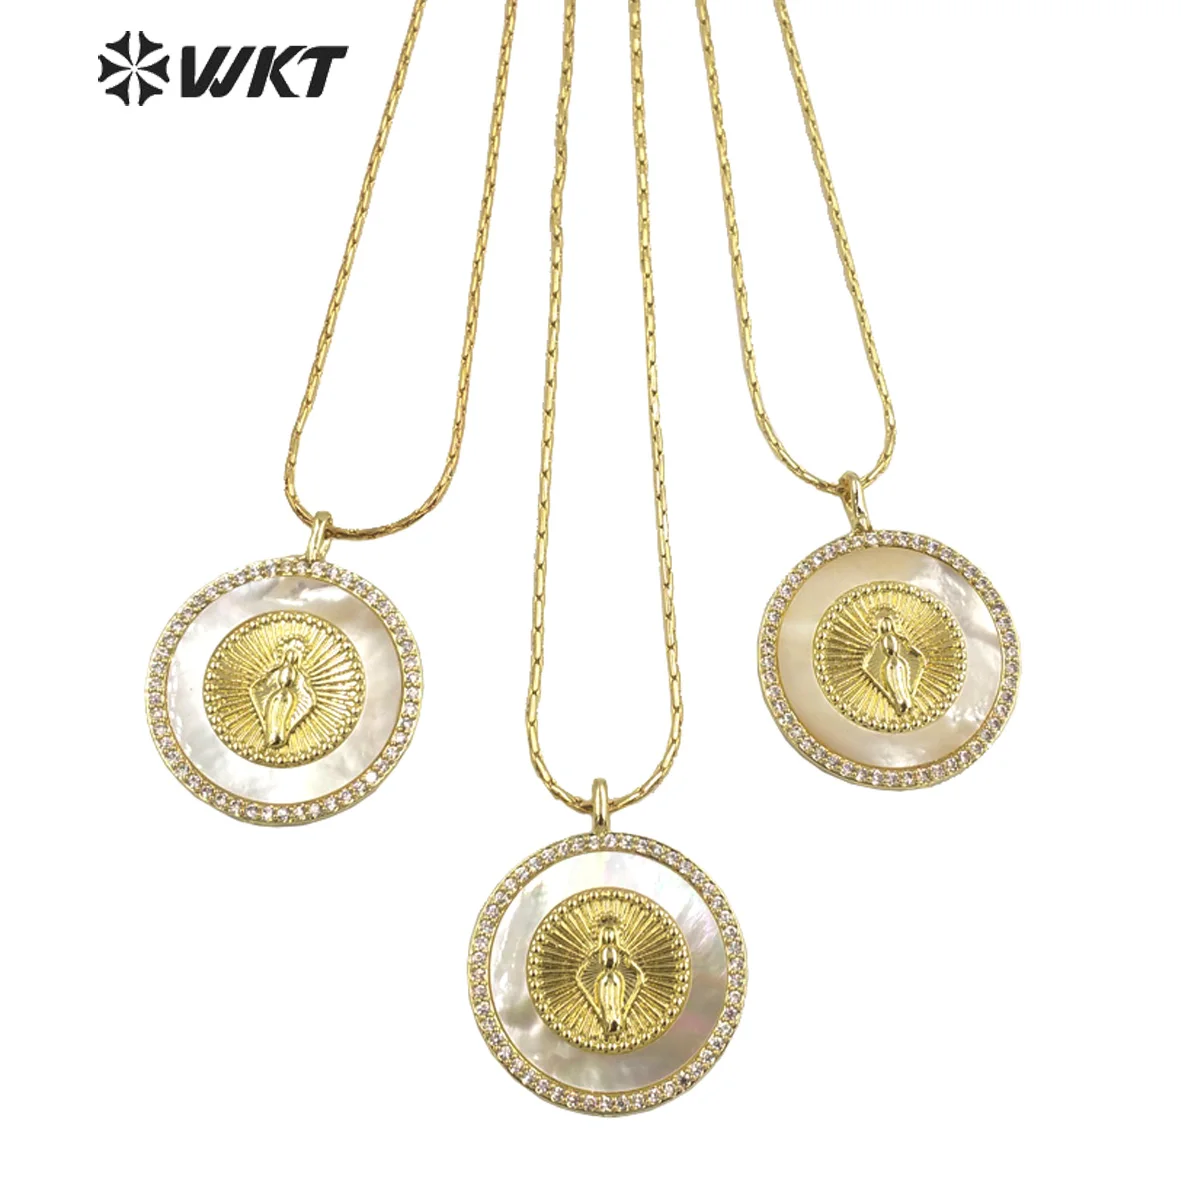 

WT-MN982 WKT 2023 Religious Style Natural Shell & Zircon New Chain Design Jewelry SALE Virgin Mary Chain Necklace Party